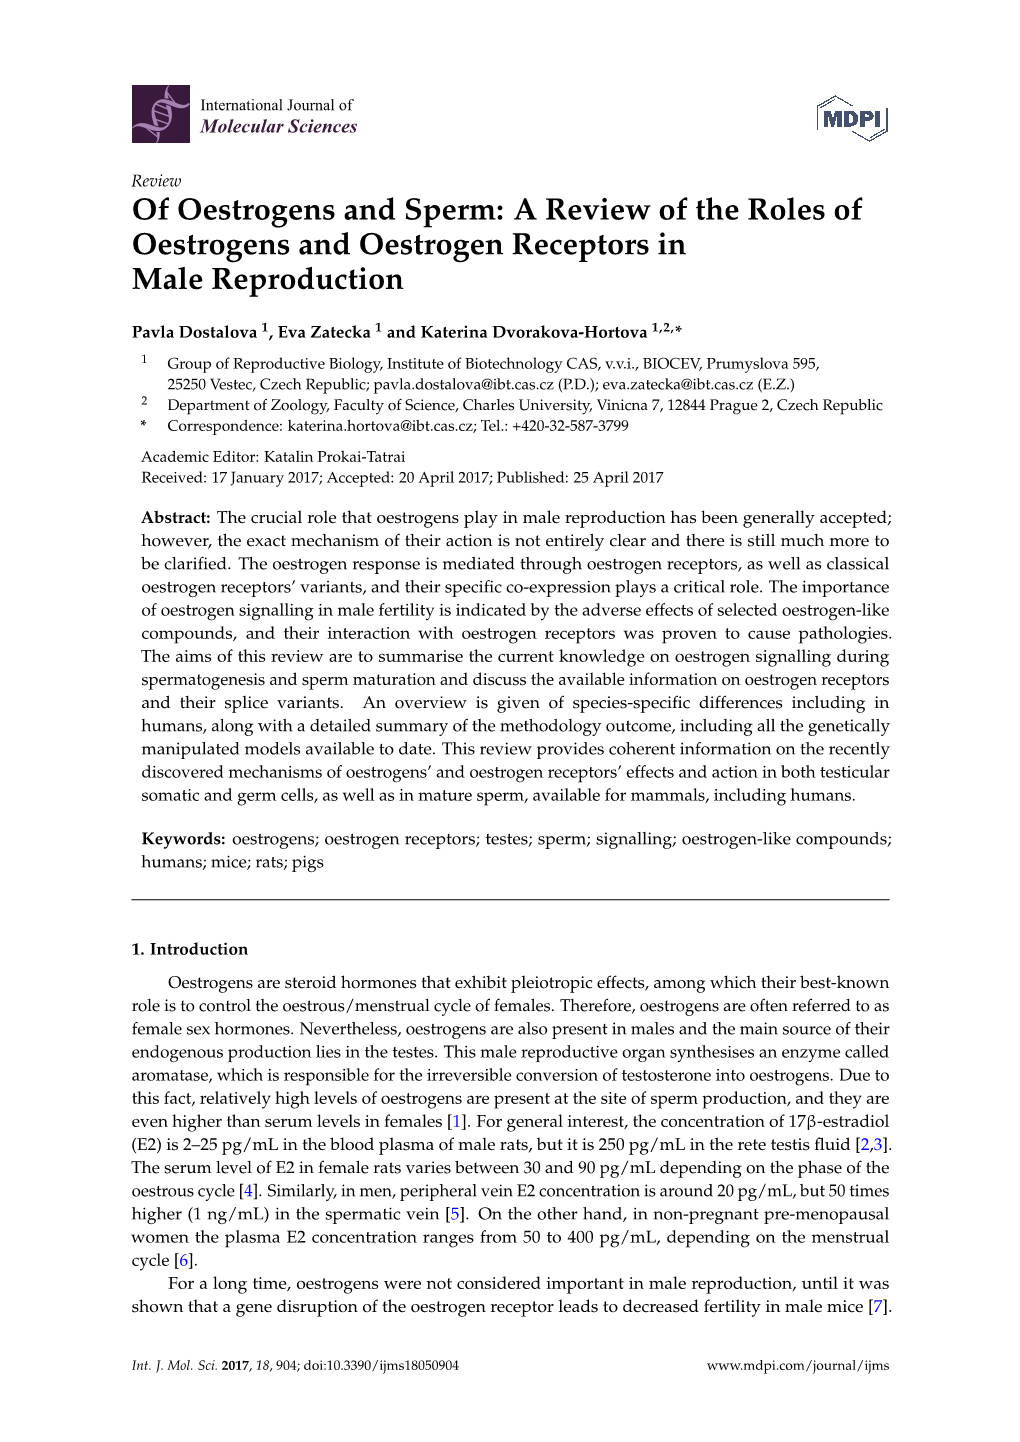 Of Oestrogens and Sperm: a Review of the Roles of Oestrogens and Oestrogen Receptors in Male Reproduction